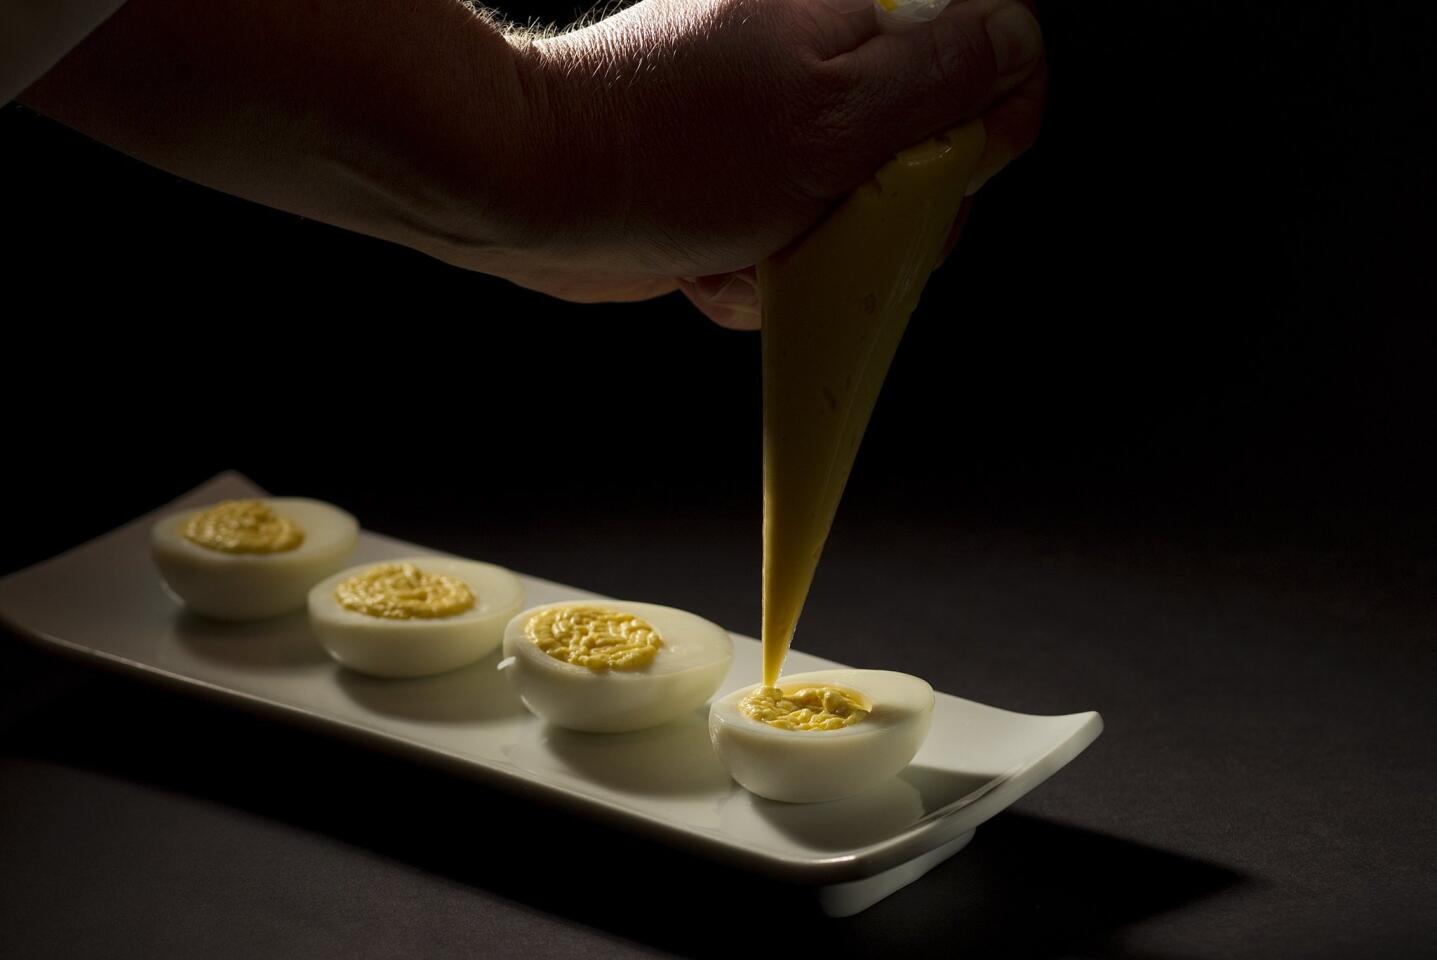 Deviled eggs with caviar